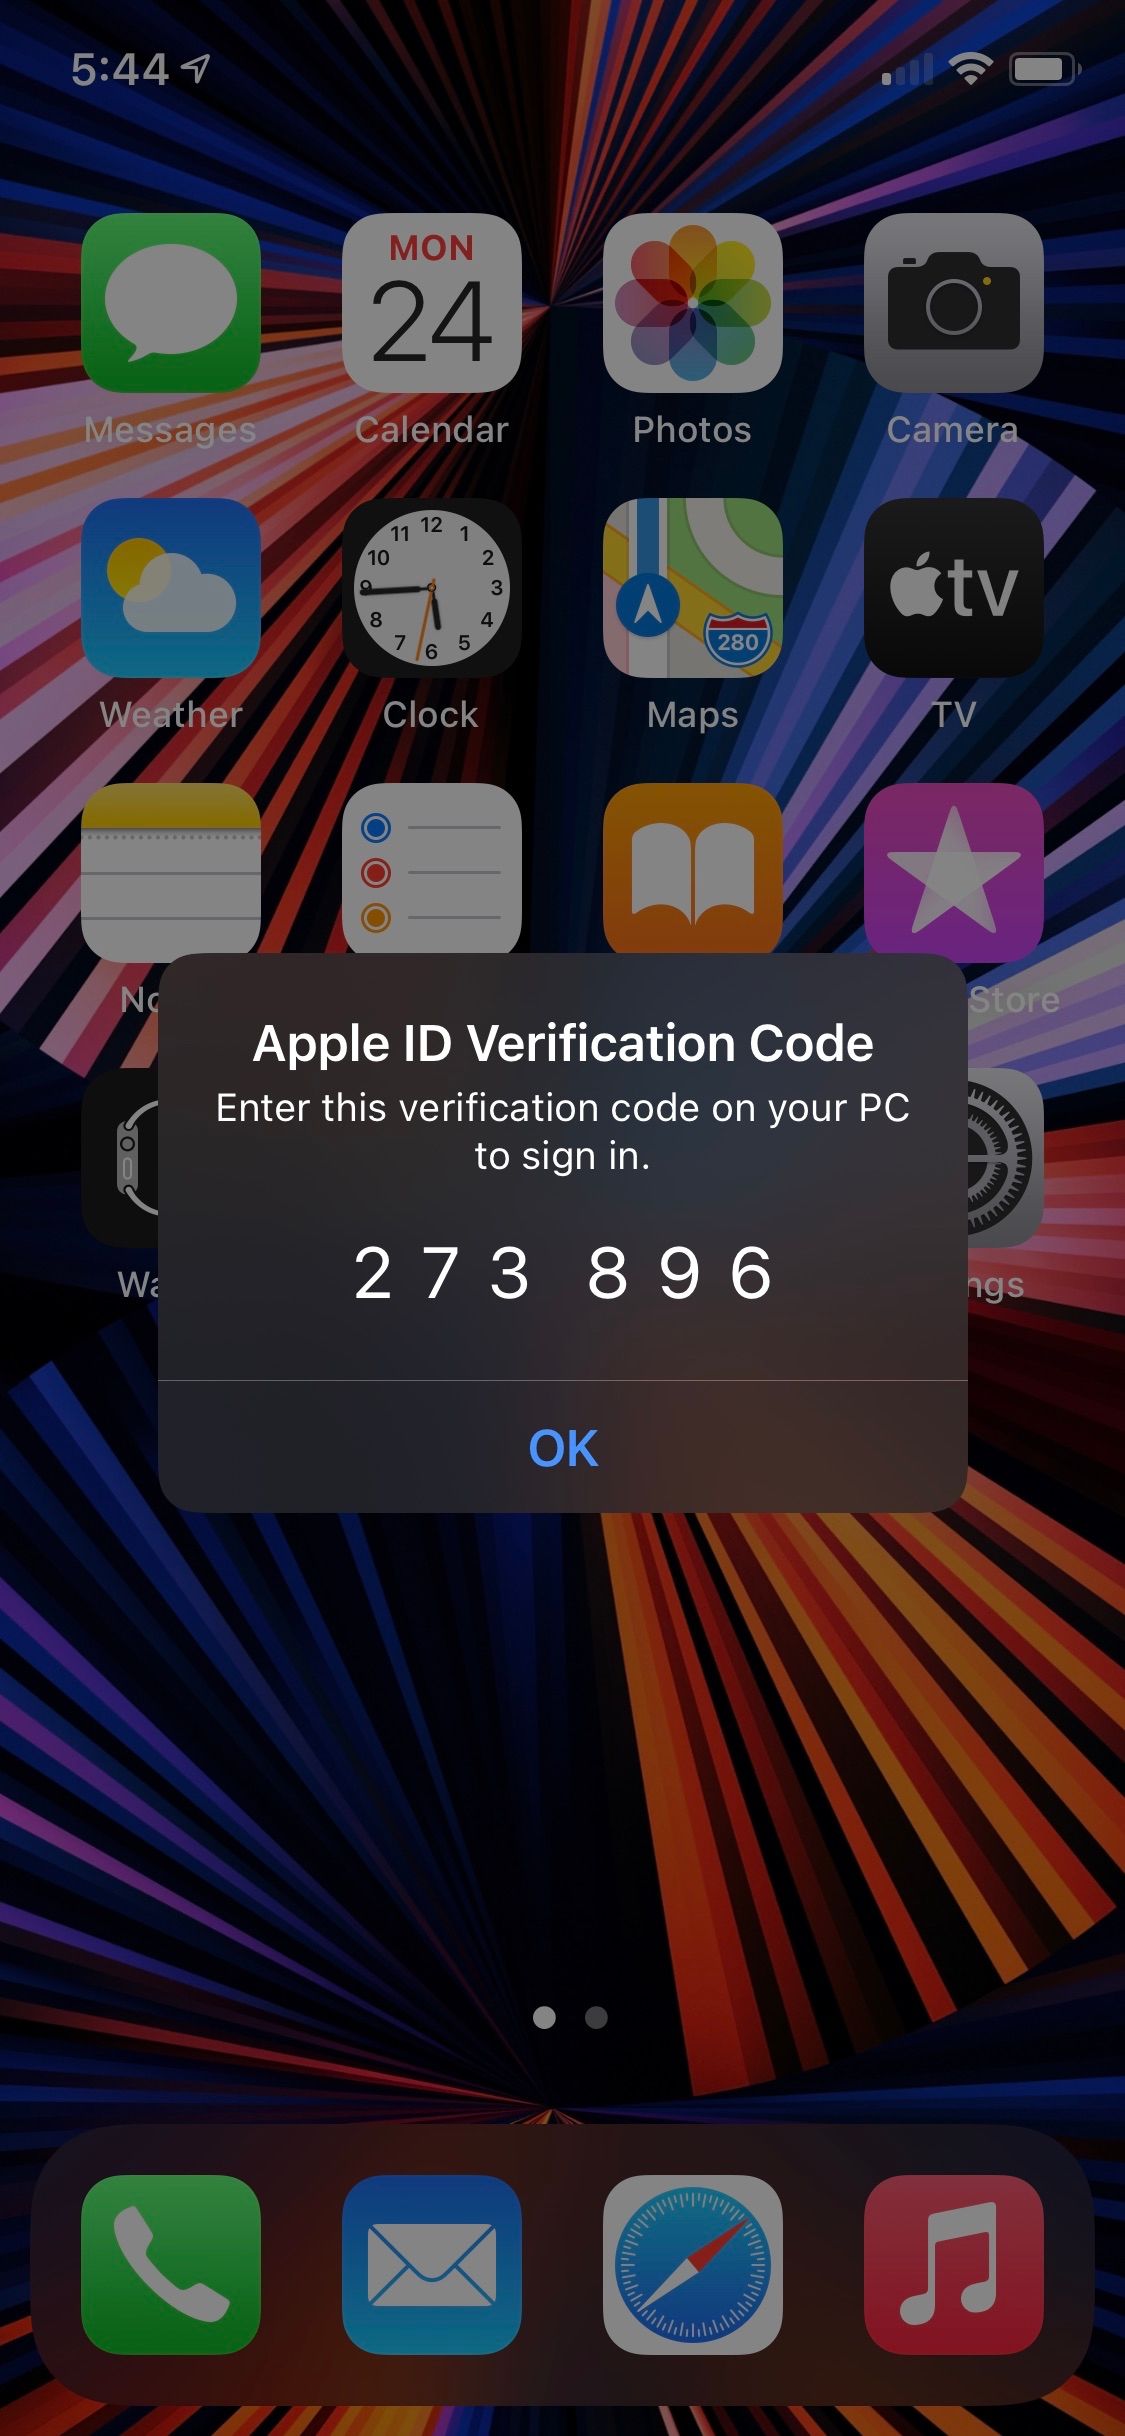 Verification code to approve iCloud